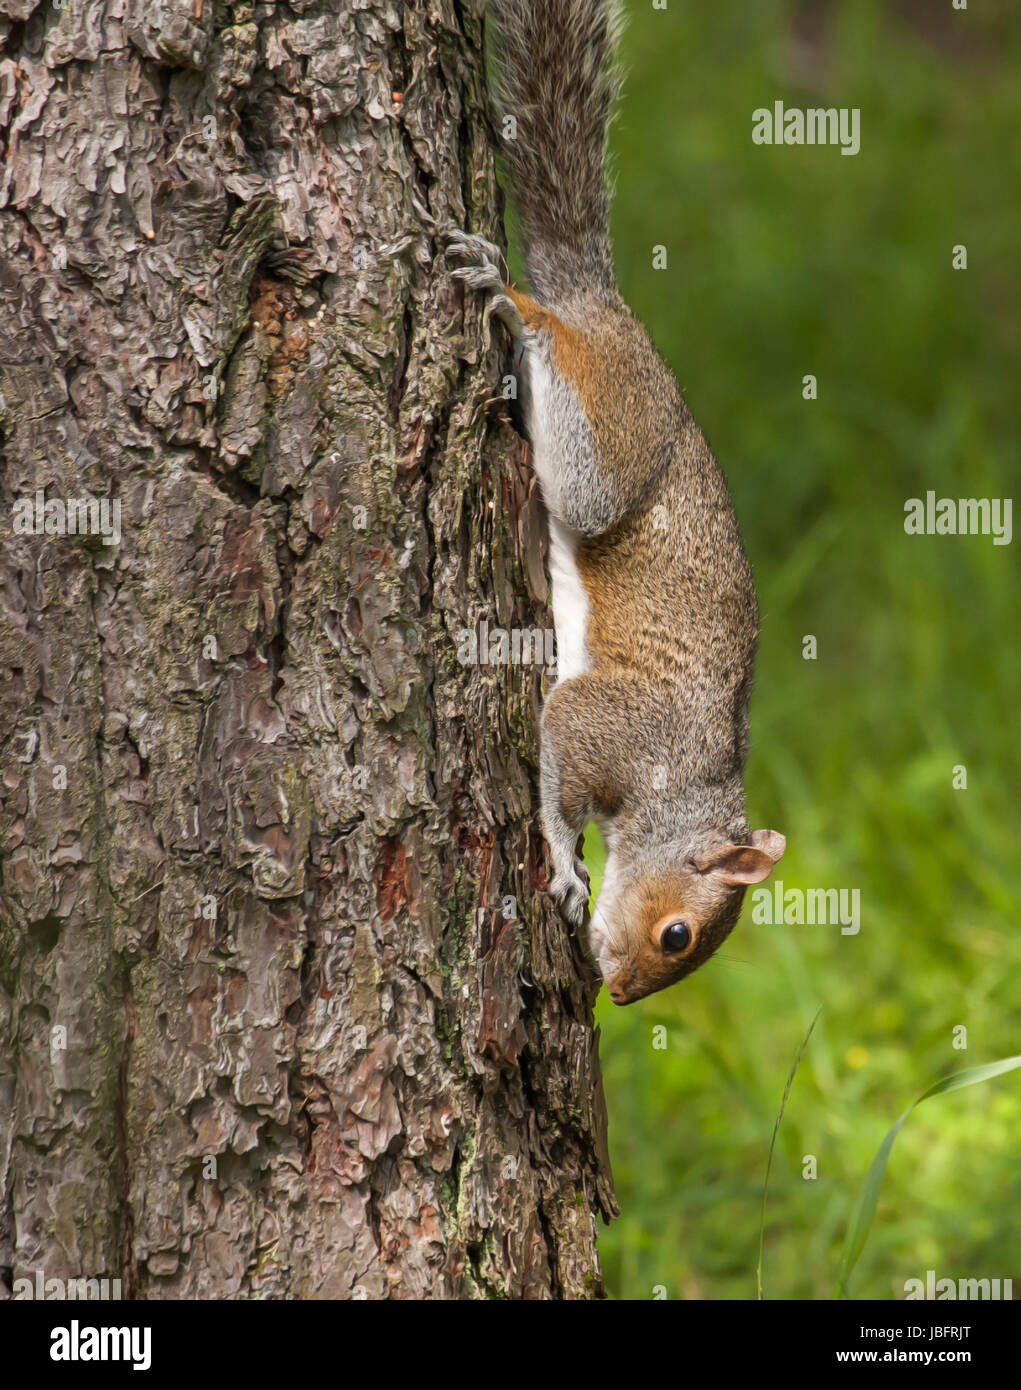 Squirrel on Side Of Tree Stock Photo